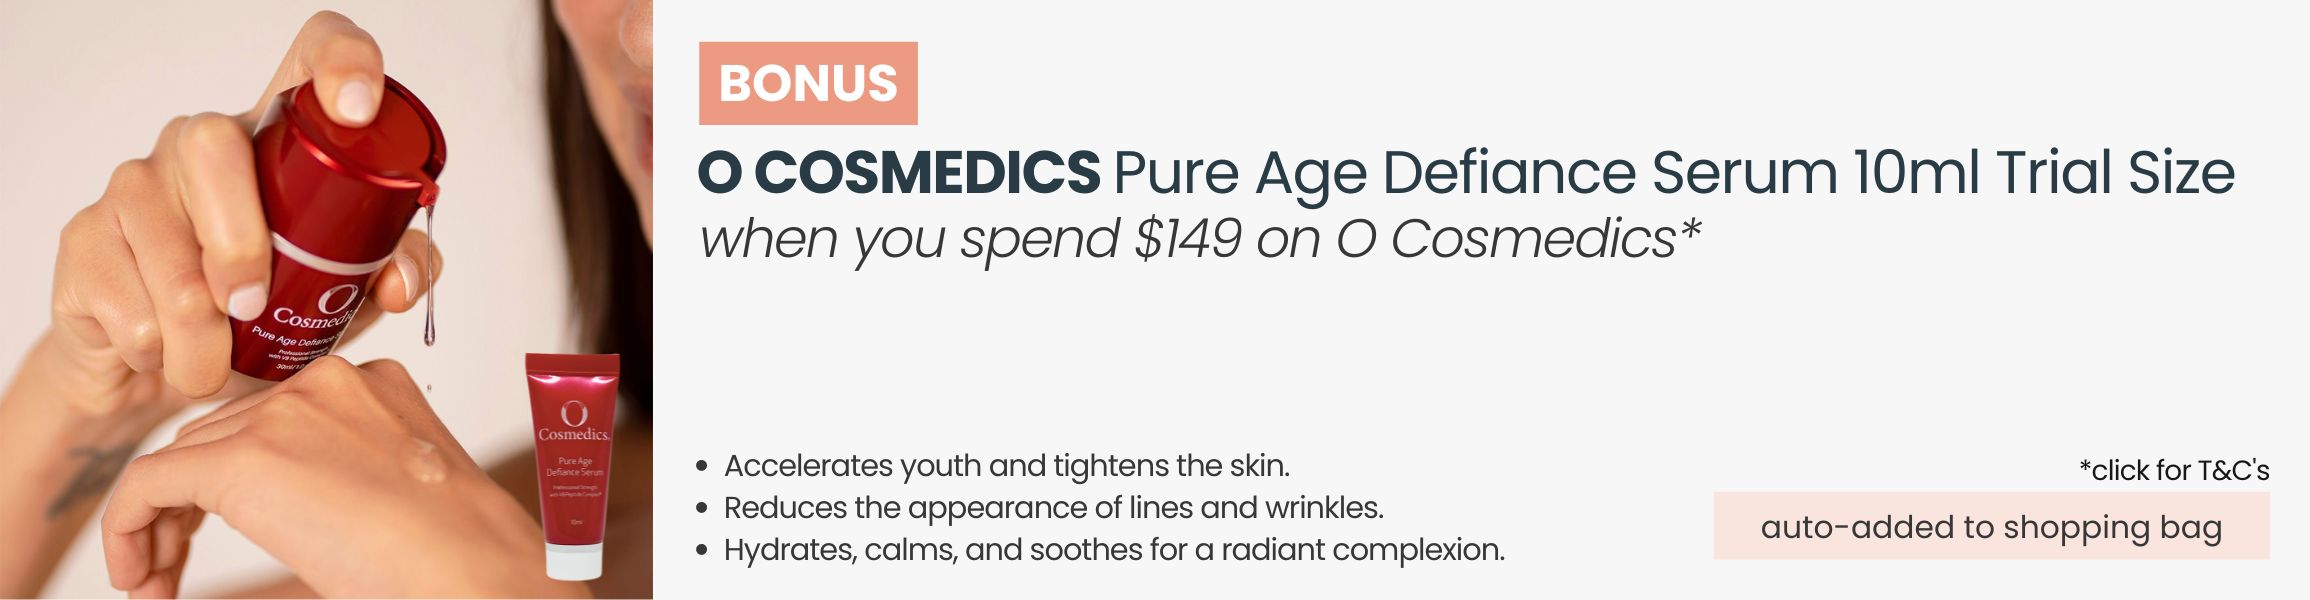 BONUS O Cosmedics Pure Age Defiance Serum 10ml Trial Size. Automatically added to your shopping bag when you spend $149 on O Cosmedics products.